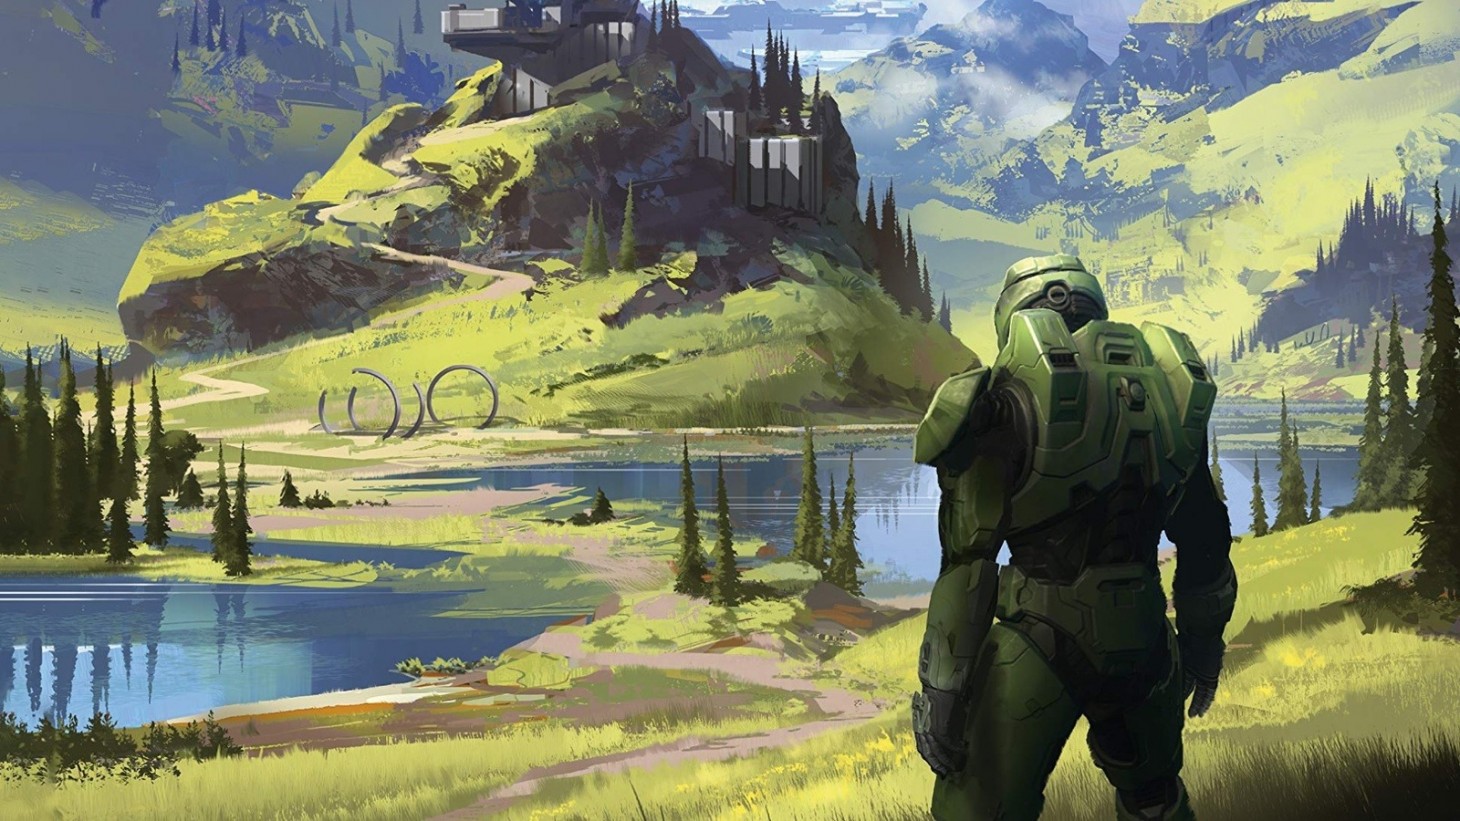 Halo Infinite Multiplayer is out now, here's everything you need to know